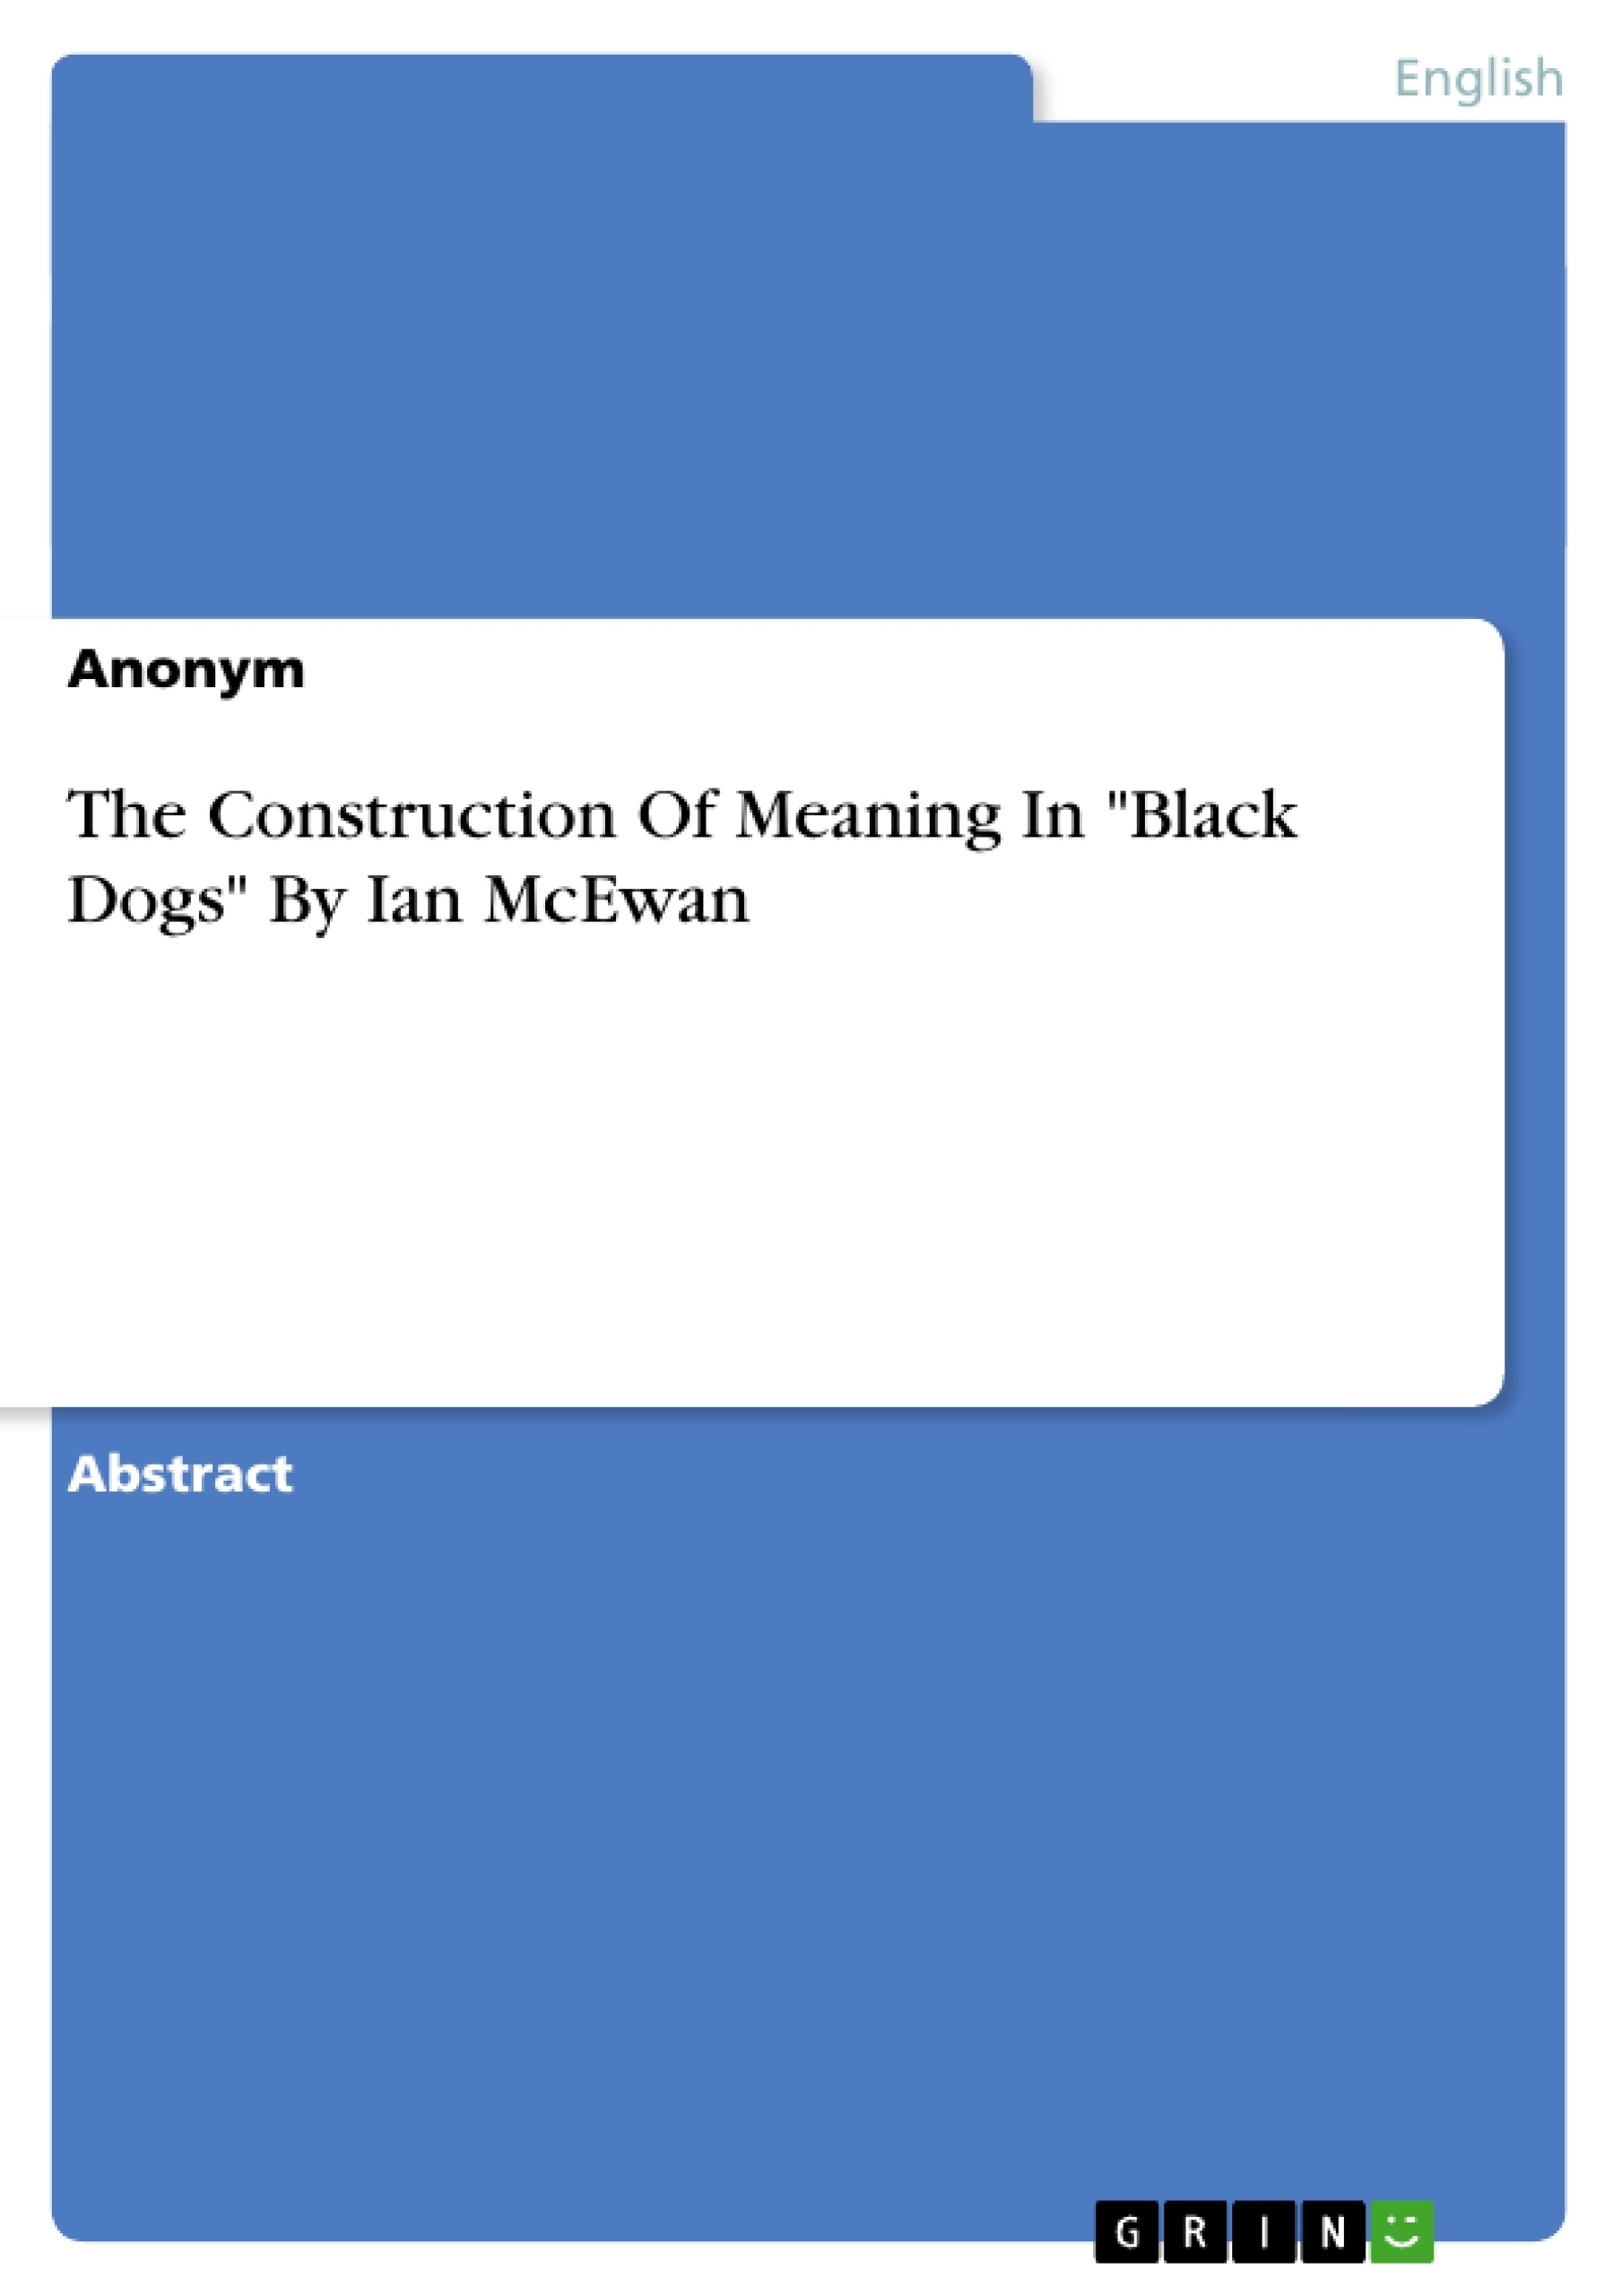 Título: The Construction Of Meaning In "Black Dogs" By
Ian McEwan